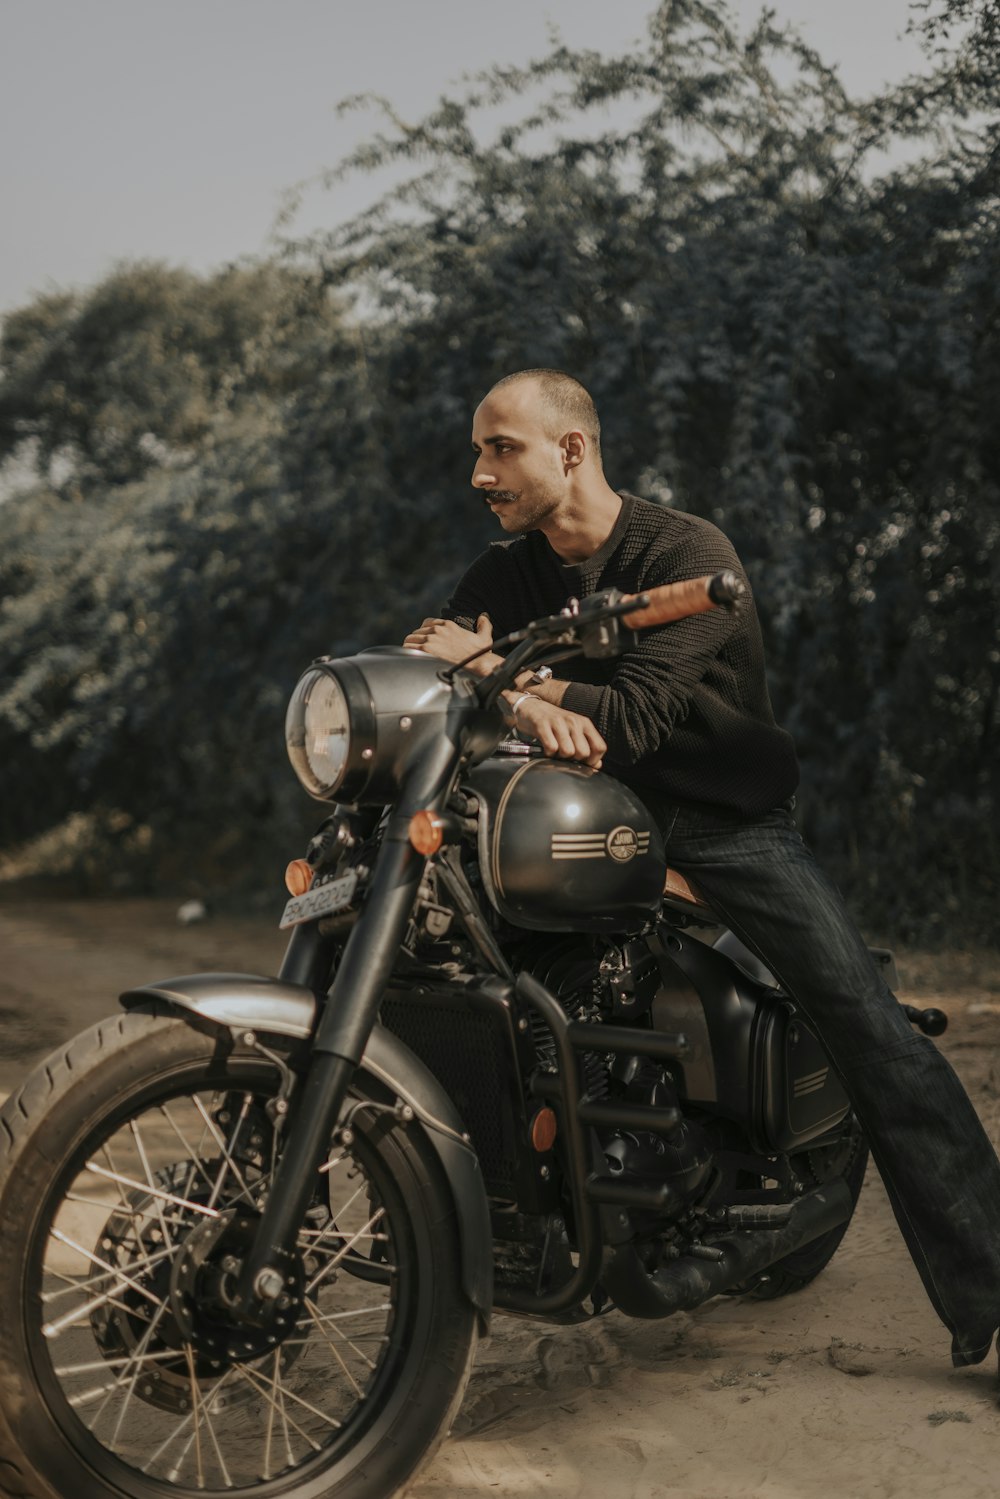 a man sitting on a motorcycle on a dirt road